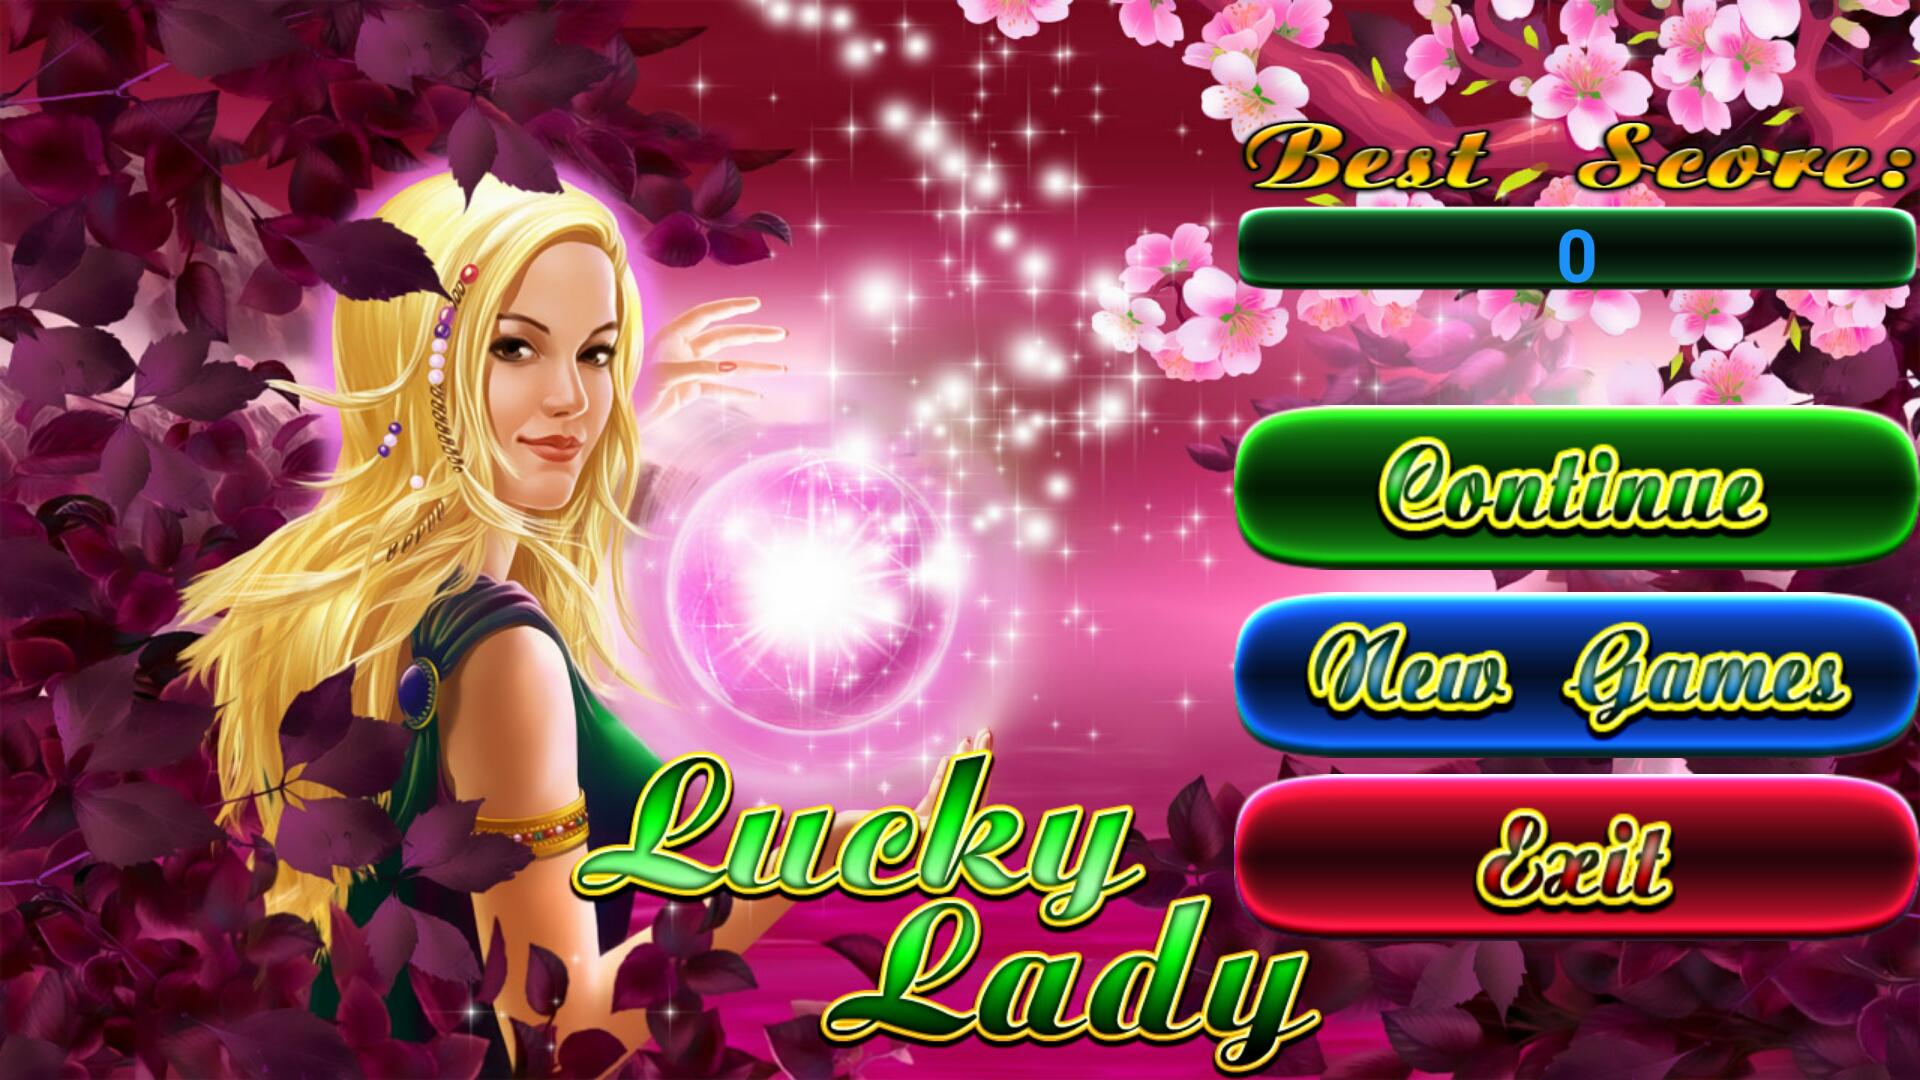 lucky lady s charm deluxe